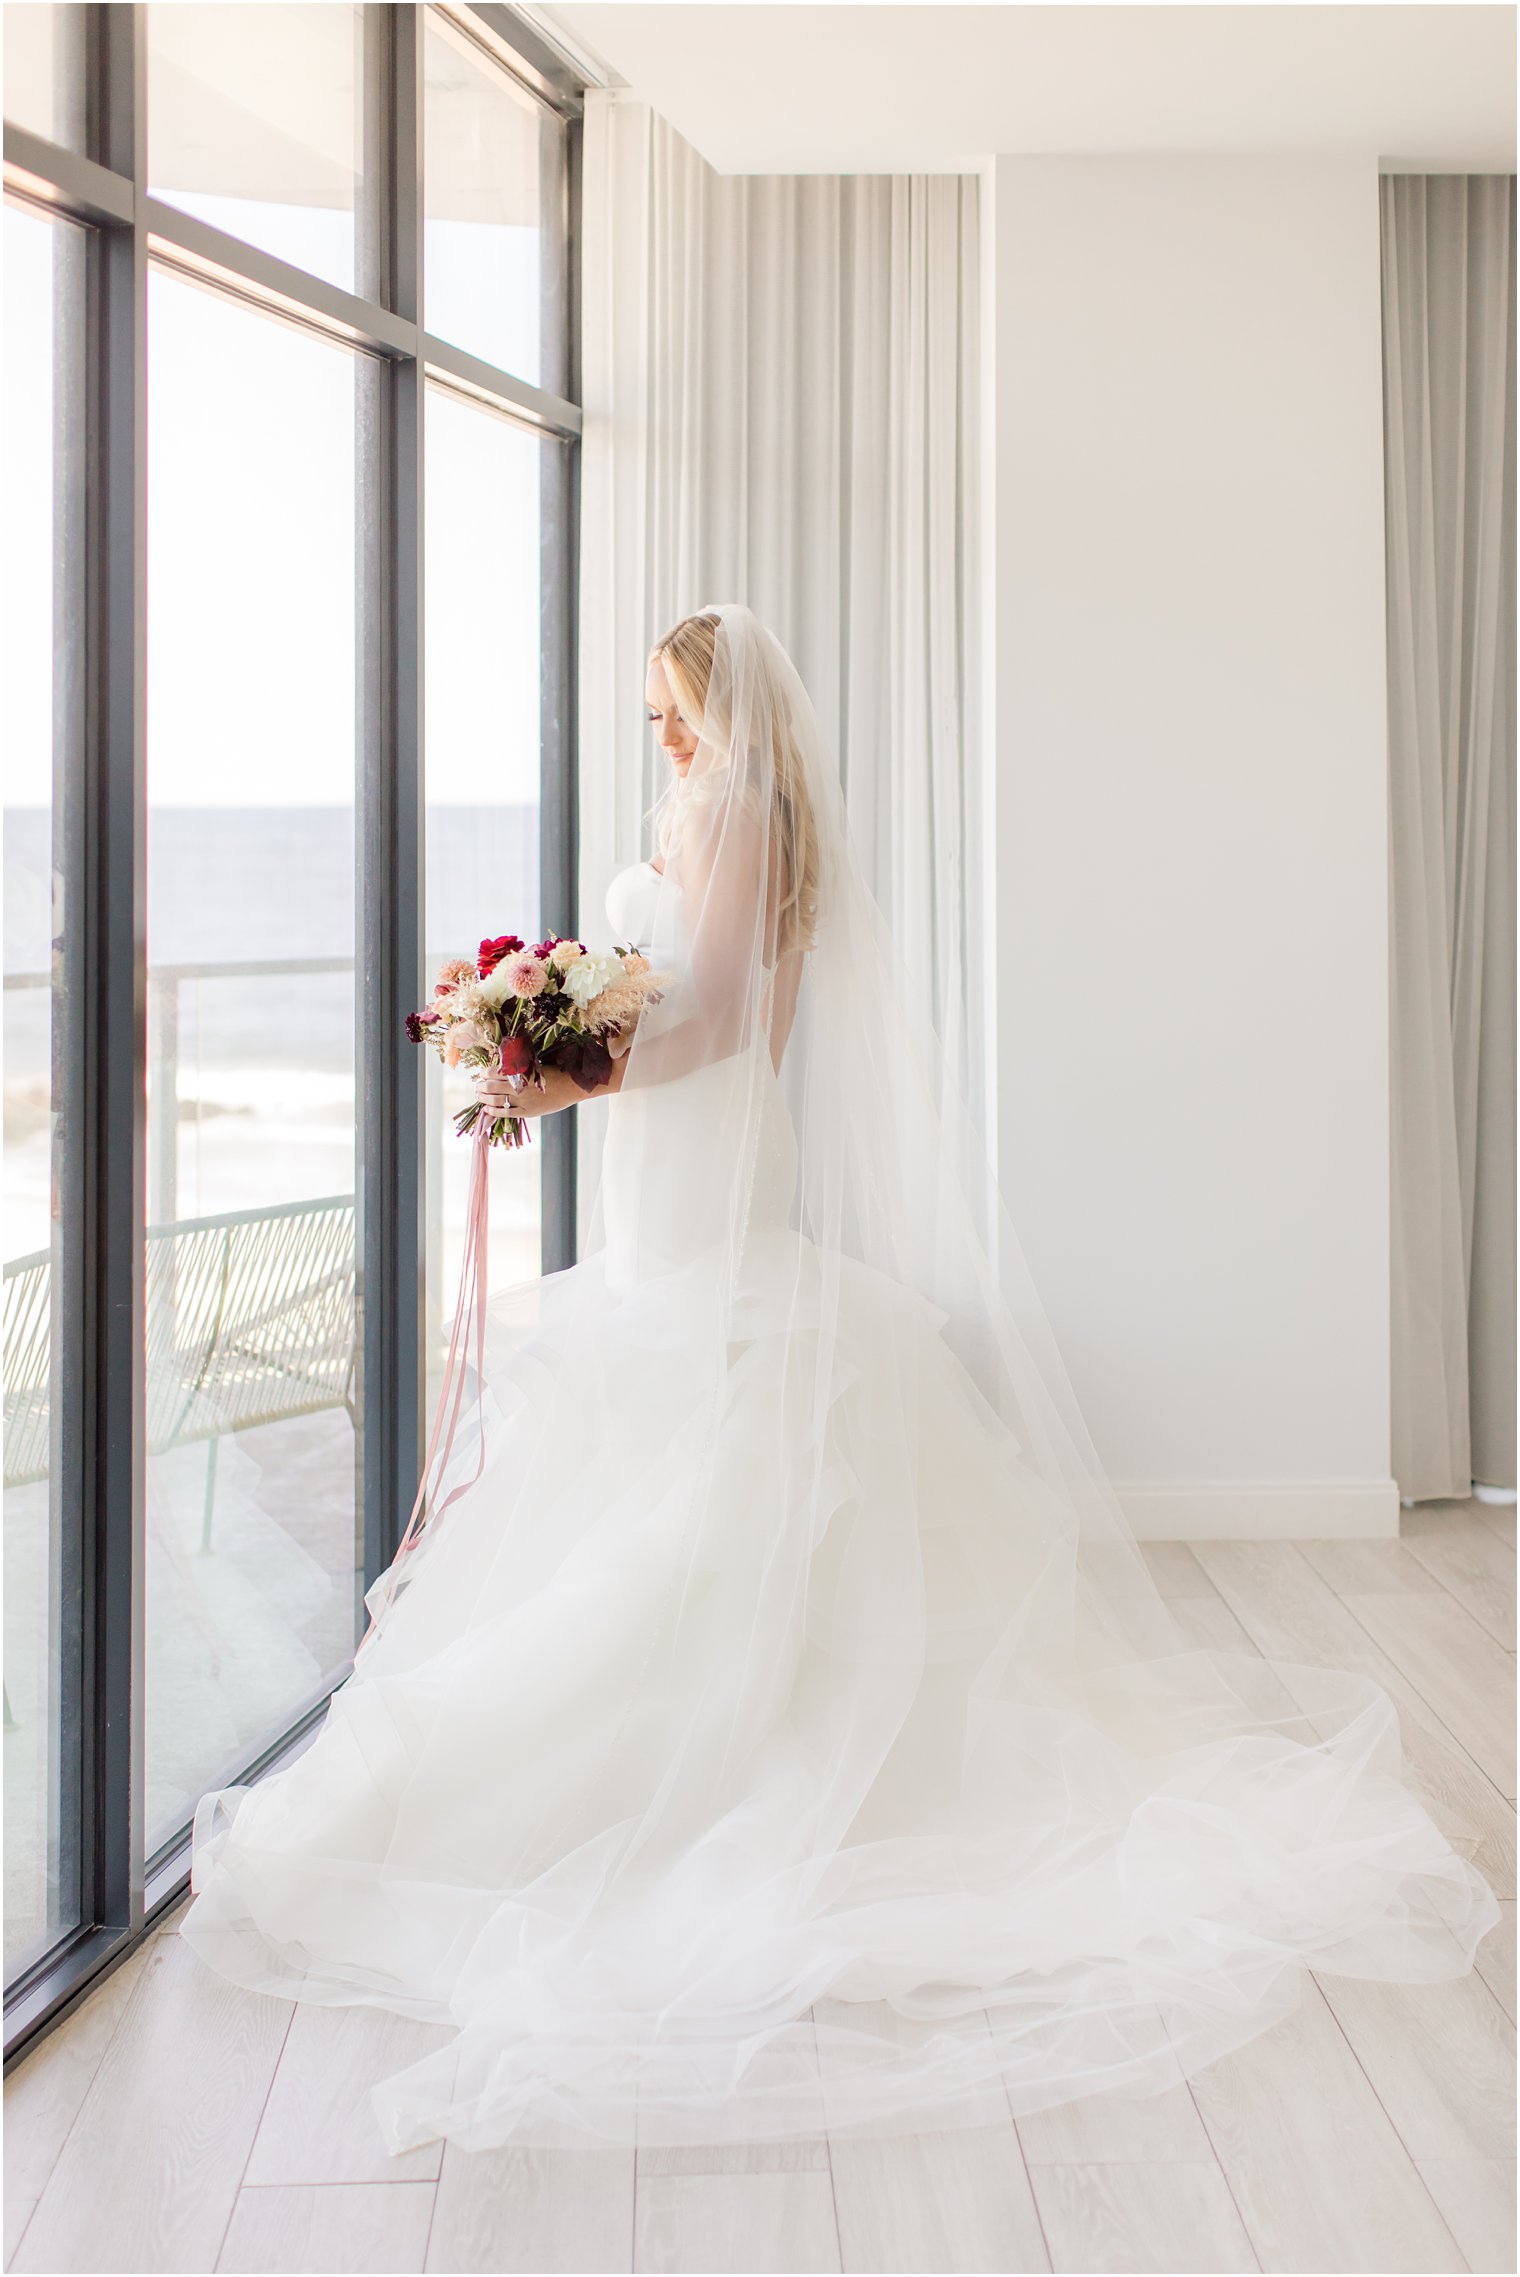 A guide to finding the perfect wedding dress